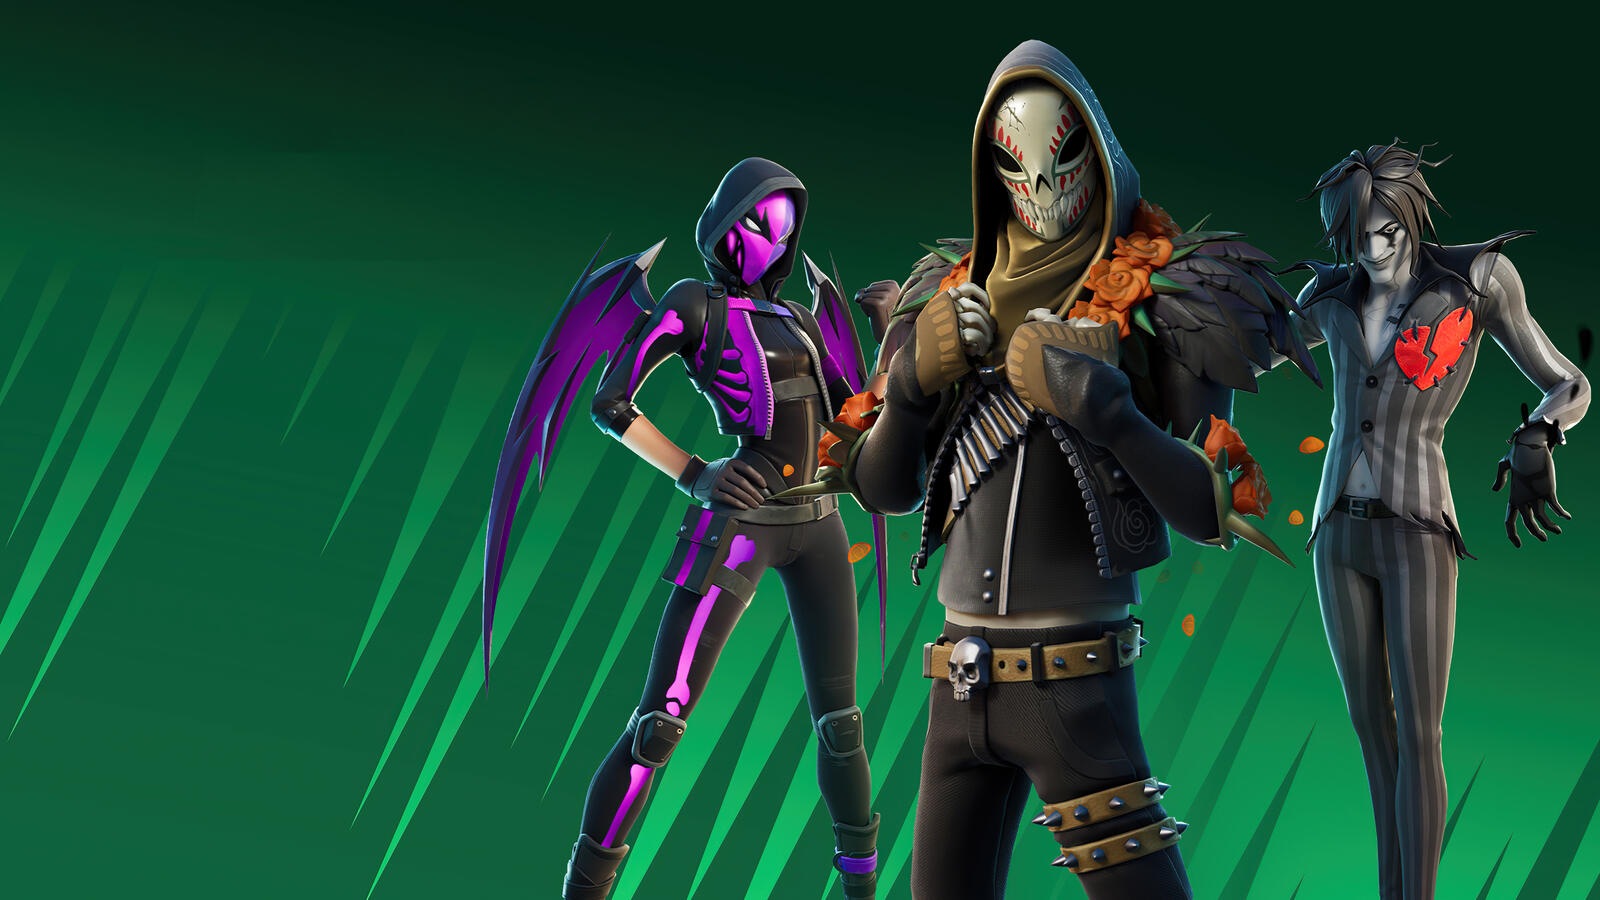 Free photo The screensaver from the game Fortnite